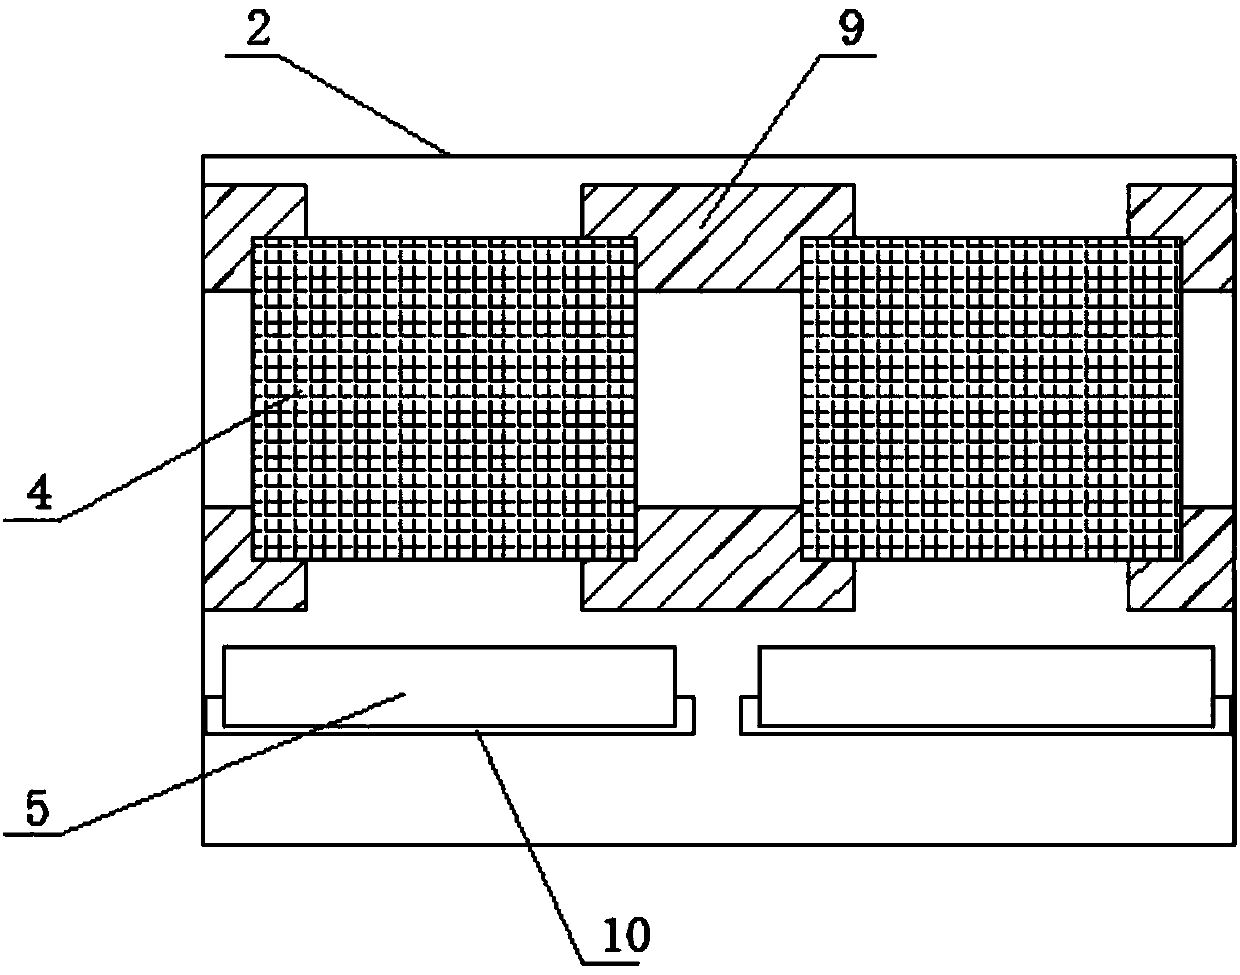 Activated carbon adsorption device for treating waste gas